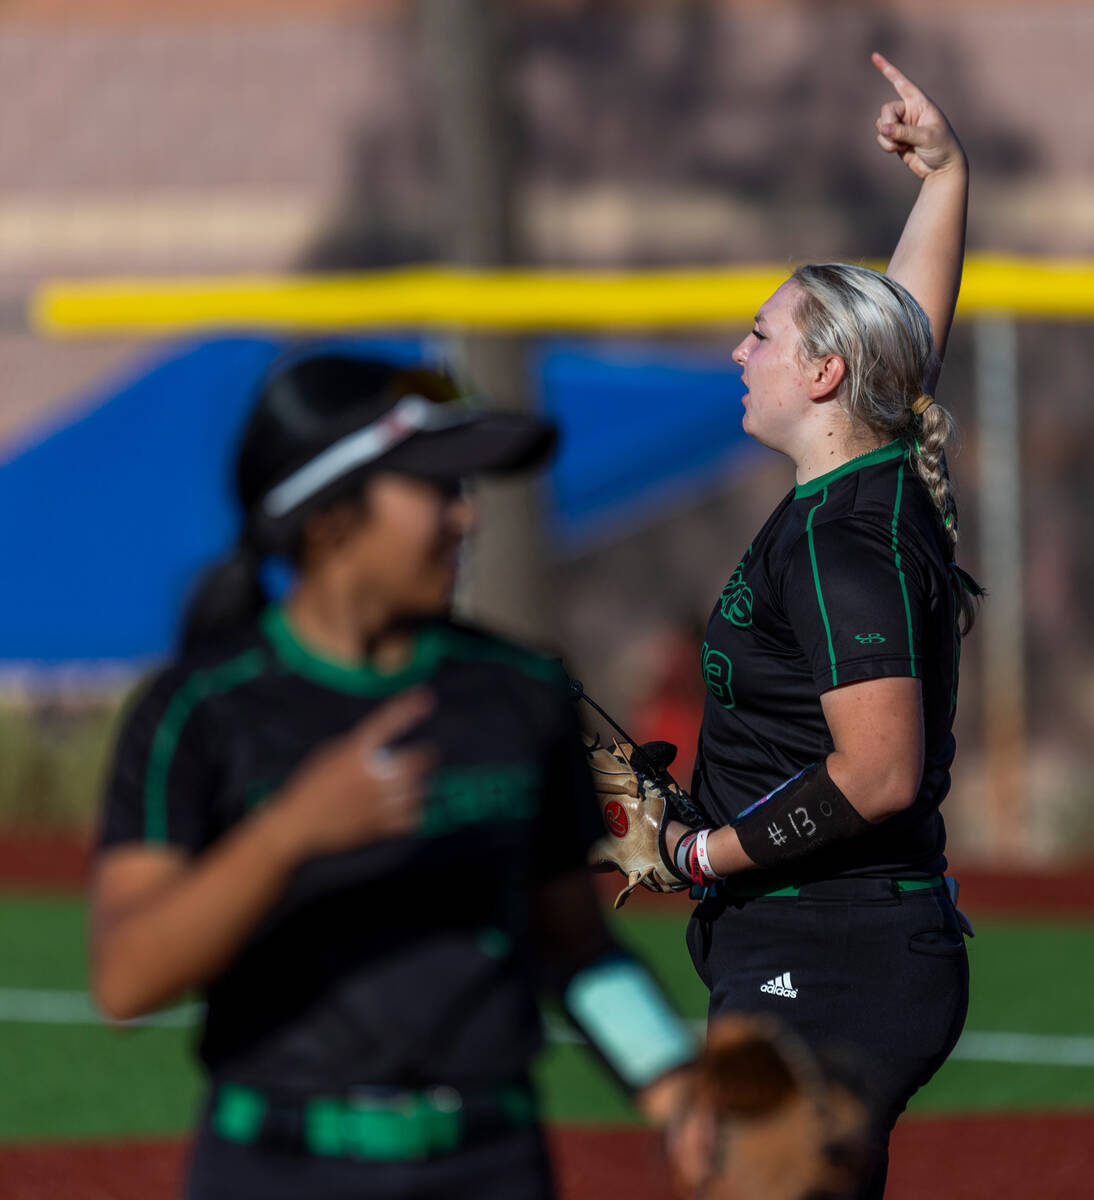 Palo Verde pitcher Brandi Odom (13) signals to her outfield against Douglas during the second i ...